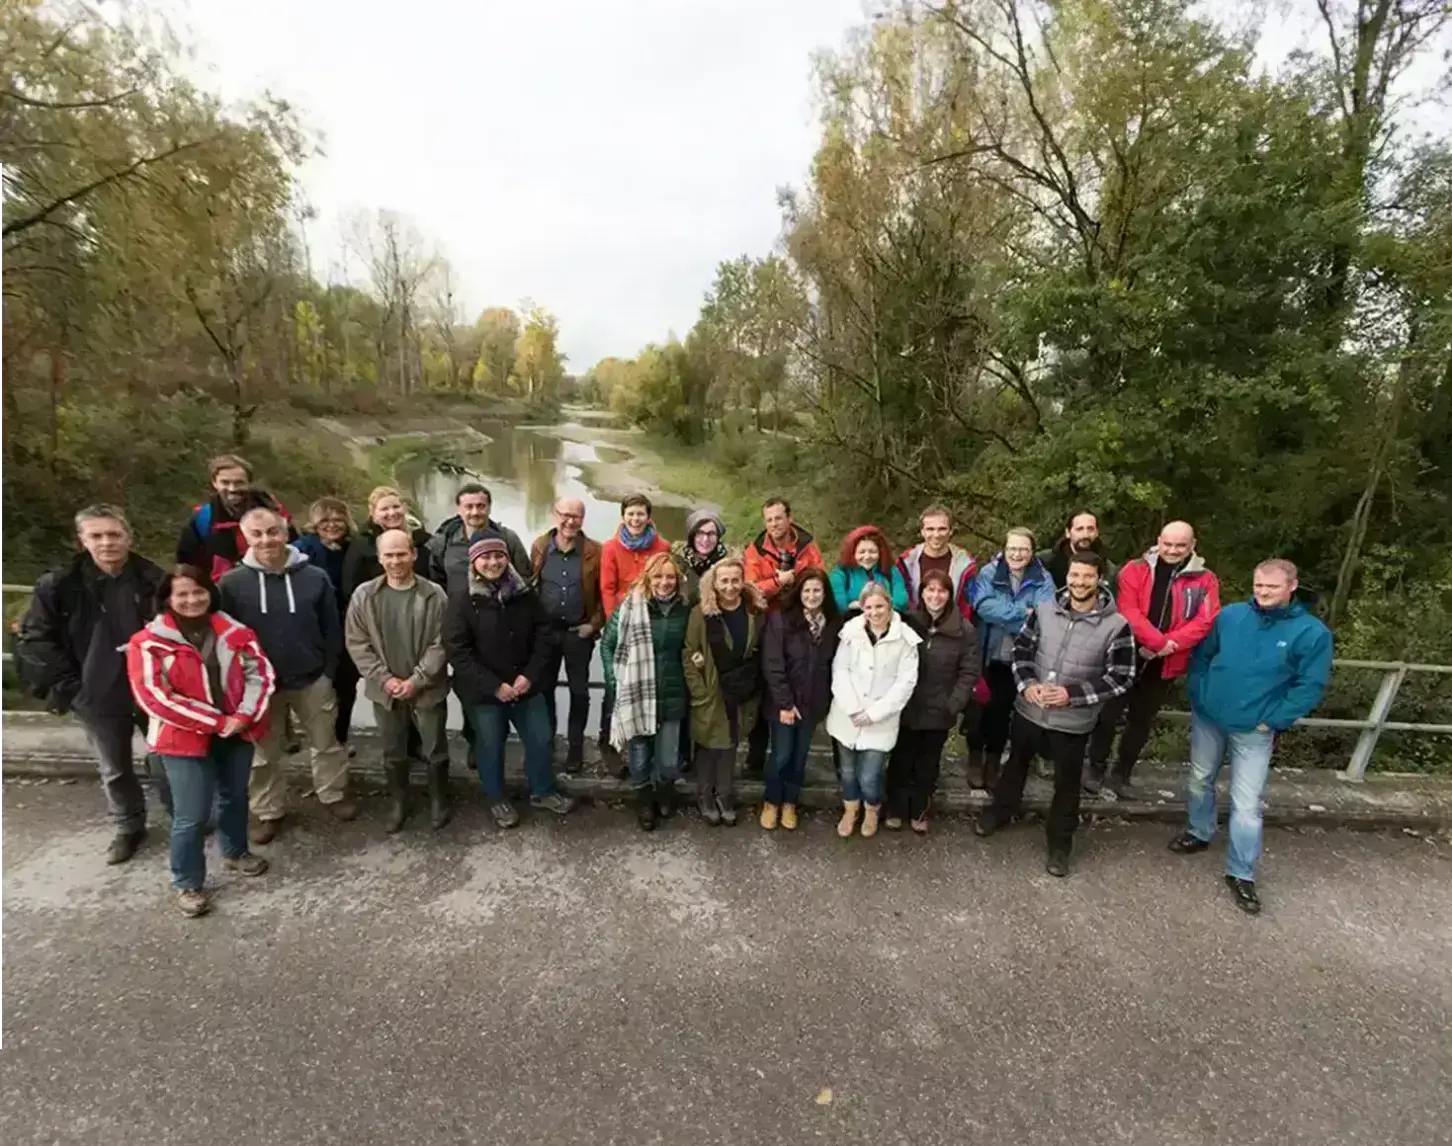 Colleagues from the LIFE+ Drava project showed great interest in the activities on the Danube (Photo: G.Safarek)